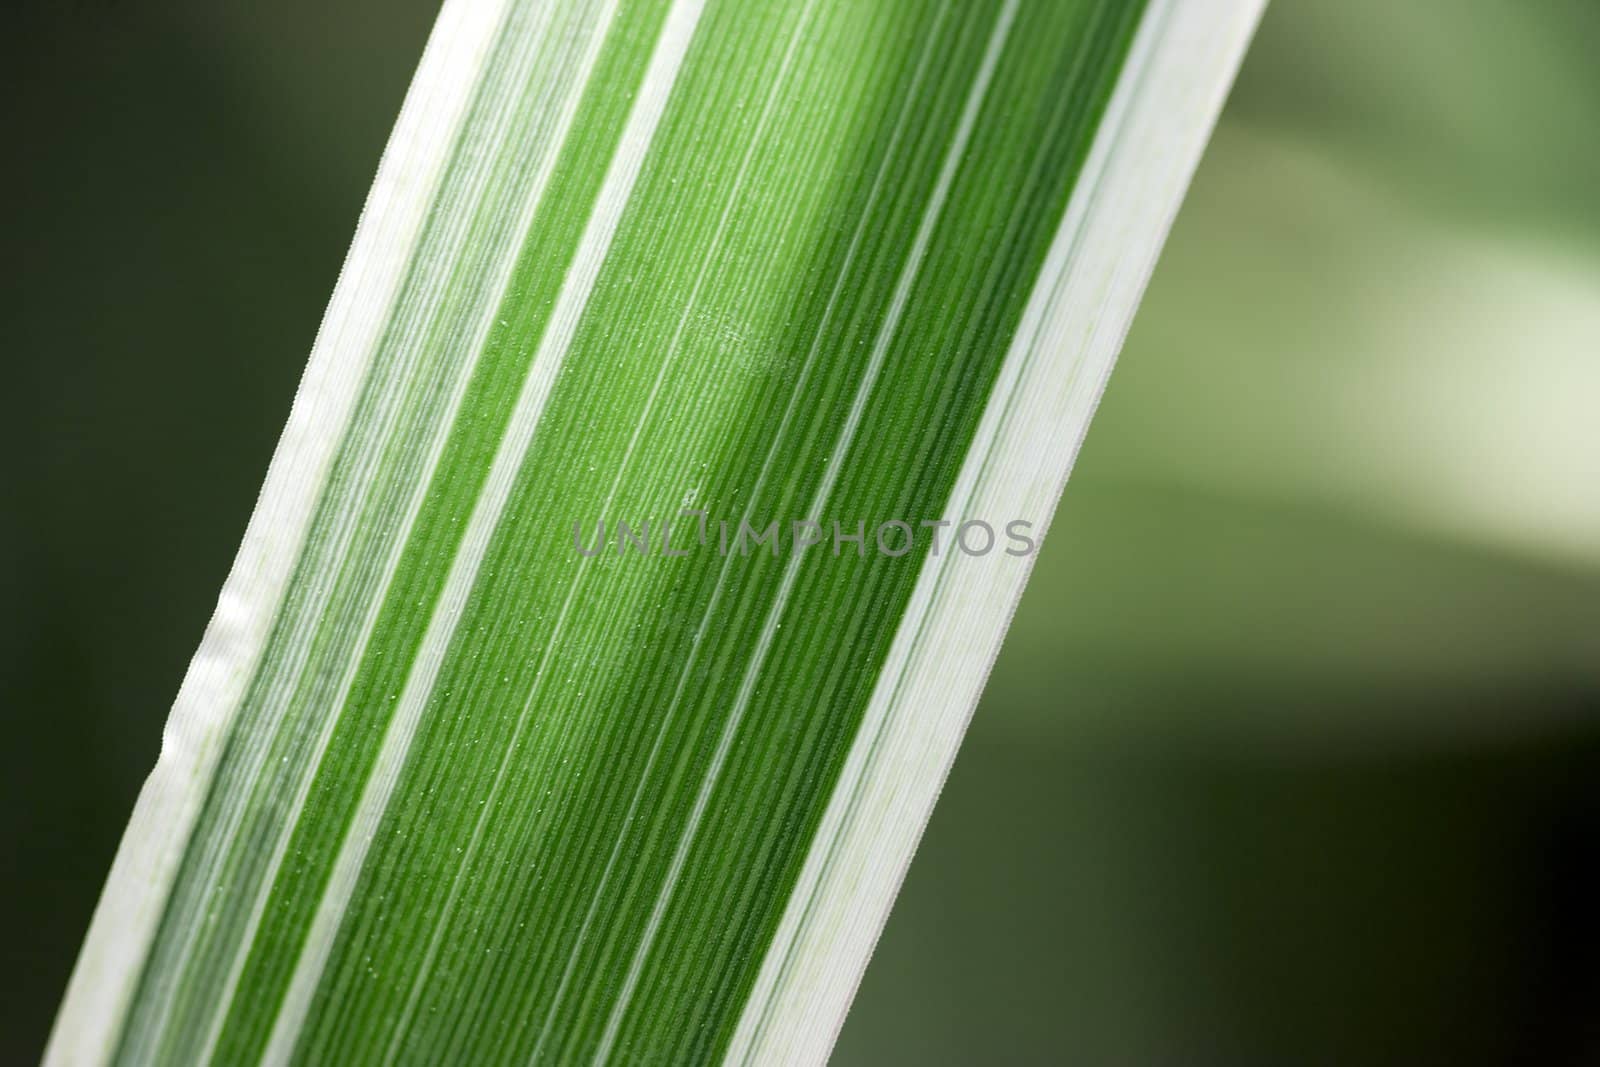 Photo of striped sheet closeup on a natural background